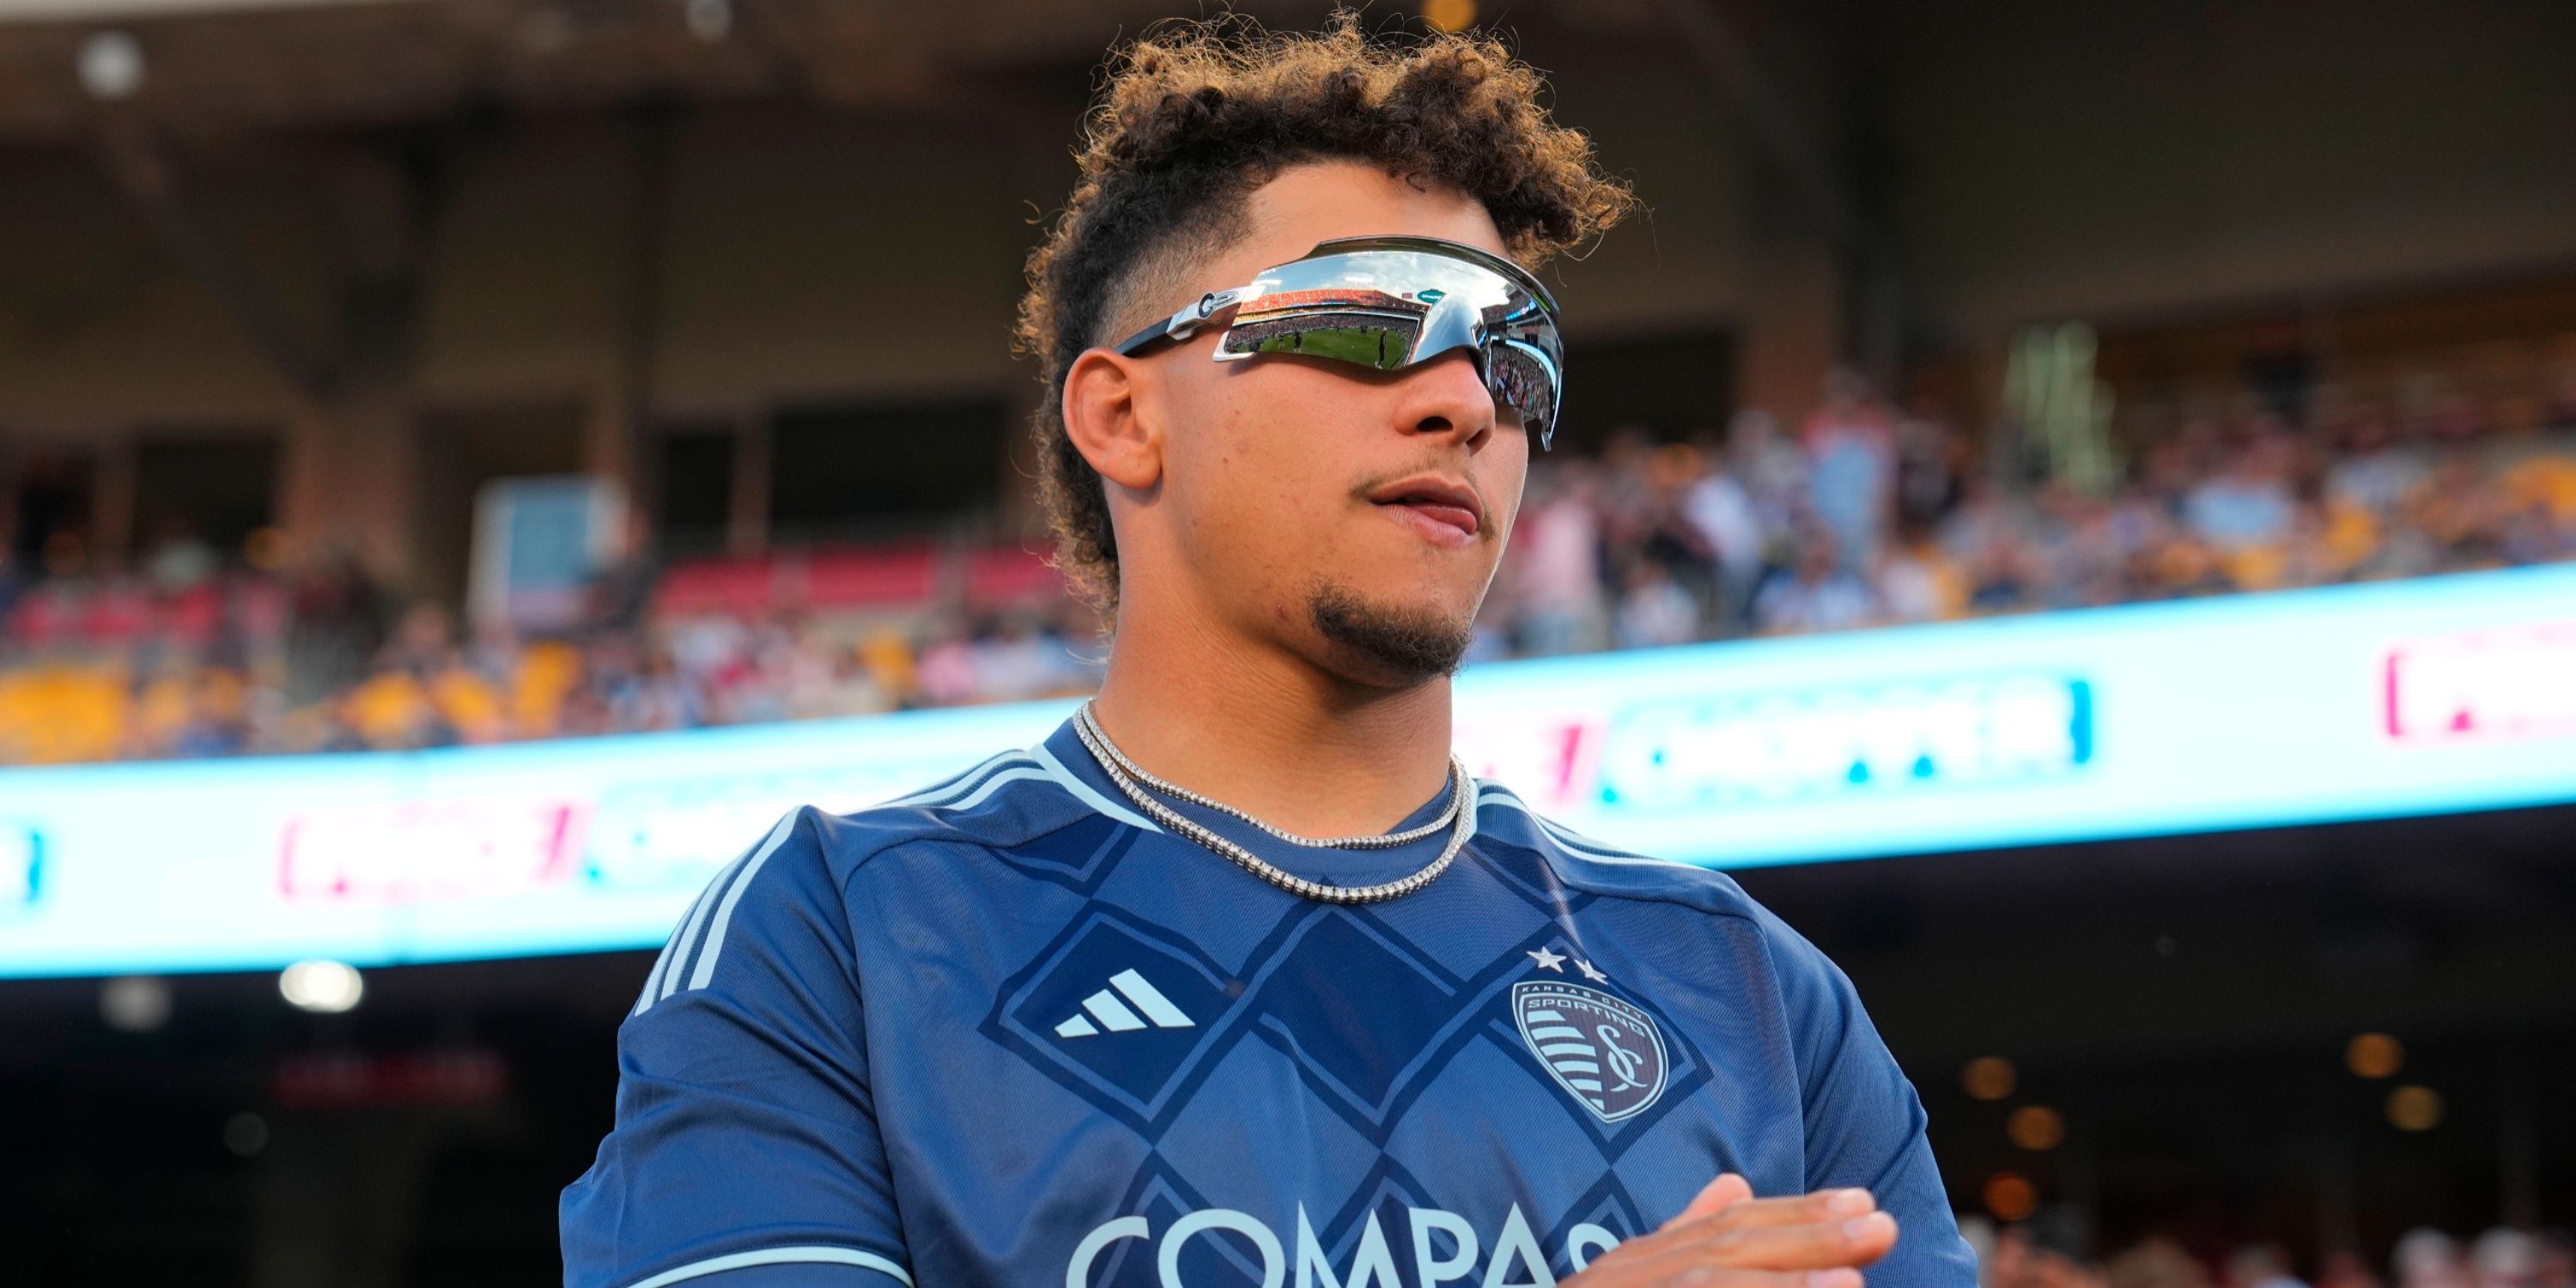 Patrick Mahomes attends a pro soccer game 